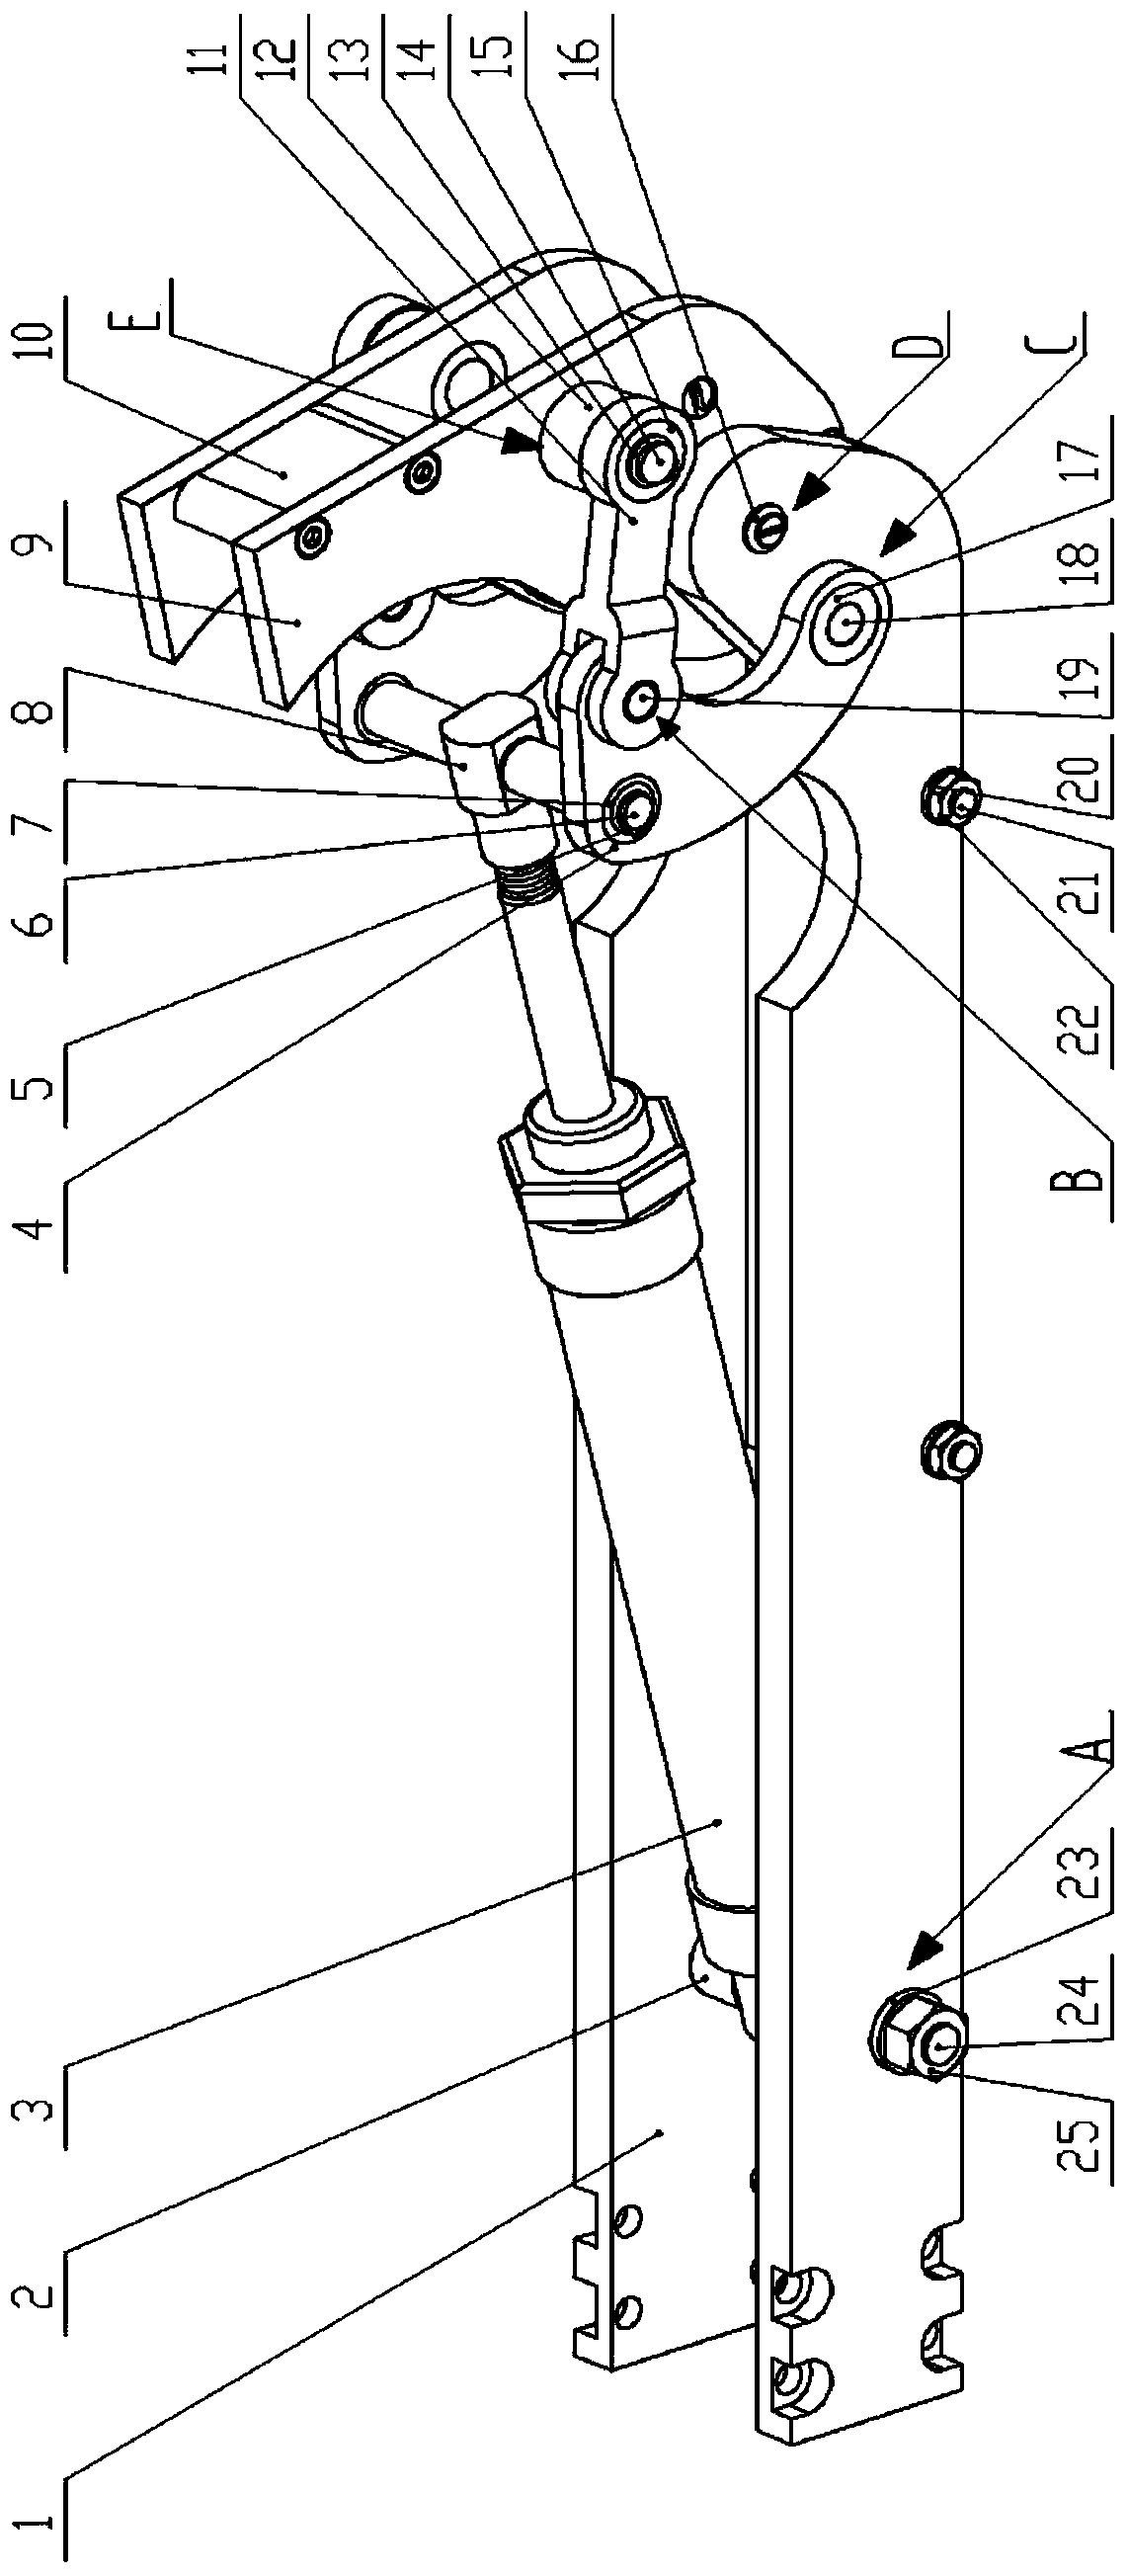 Arm joint structure of small underwater hydraulic manipulator